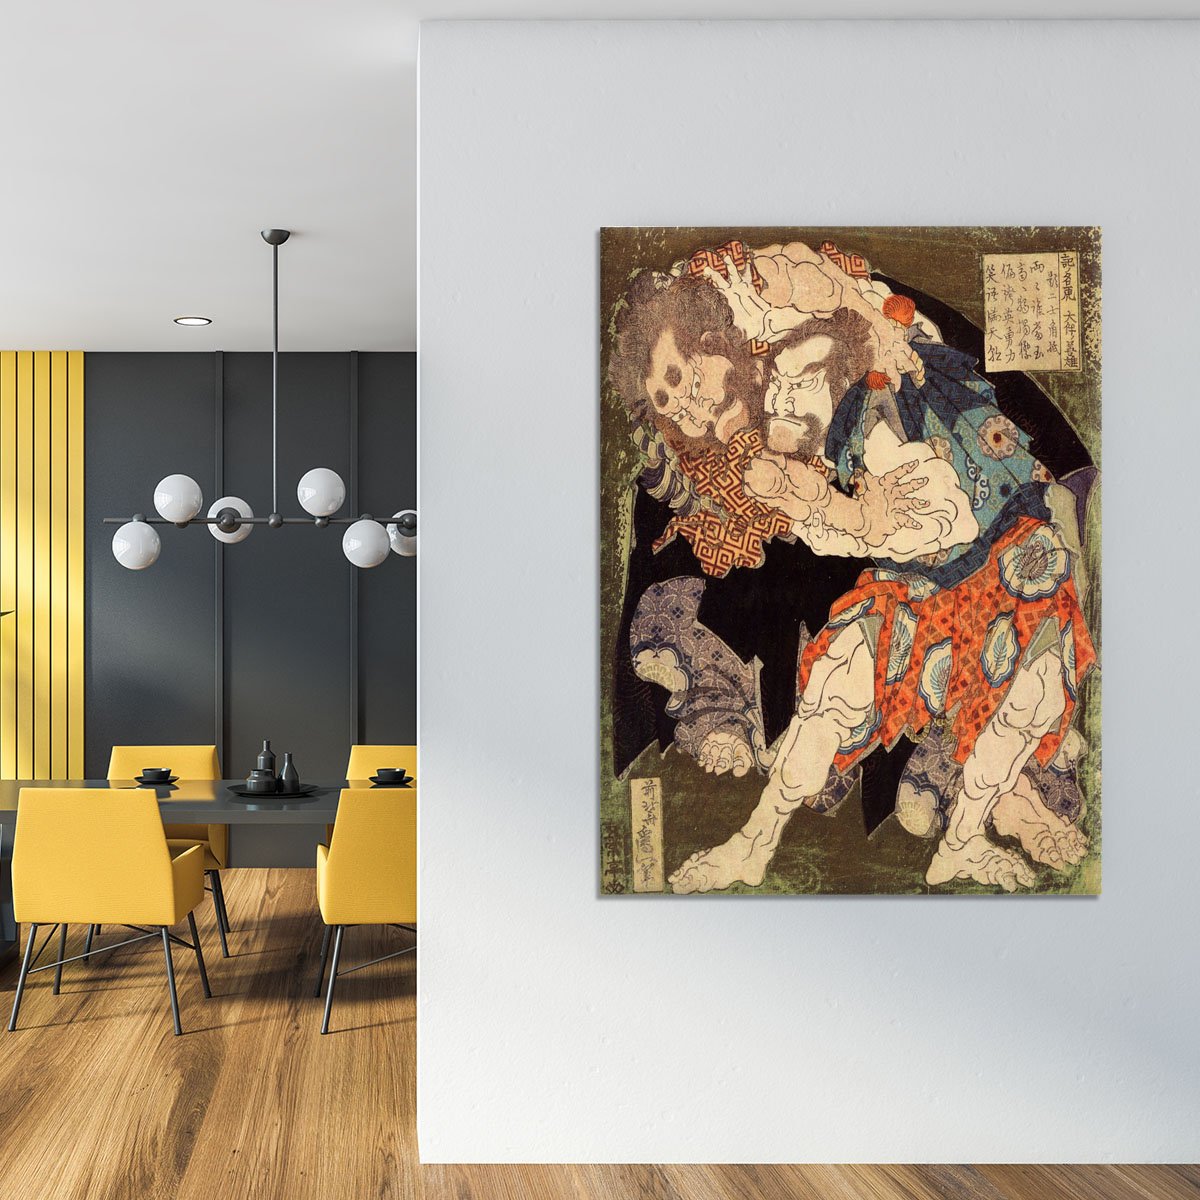 Sumo wrestlers by Hokusai Canvas Print or Poster